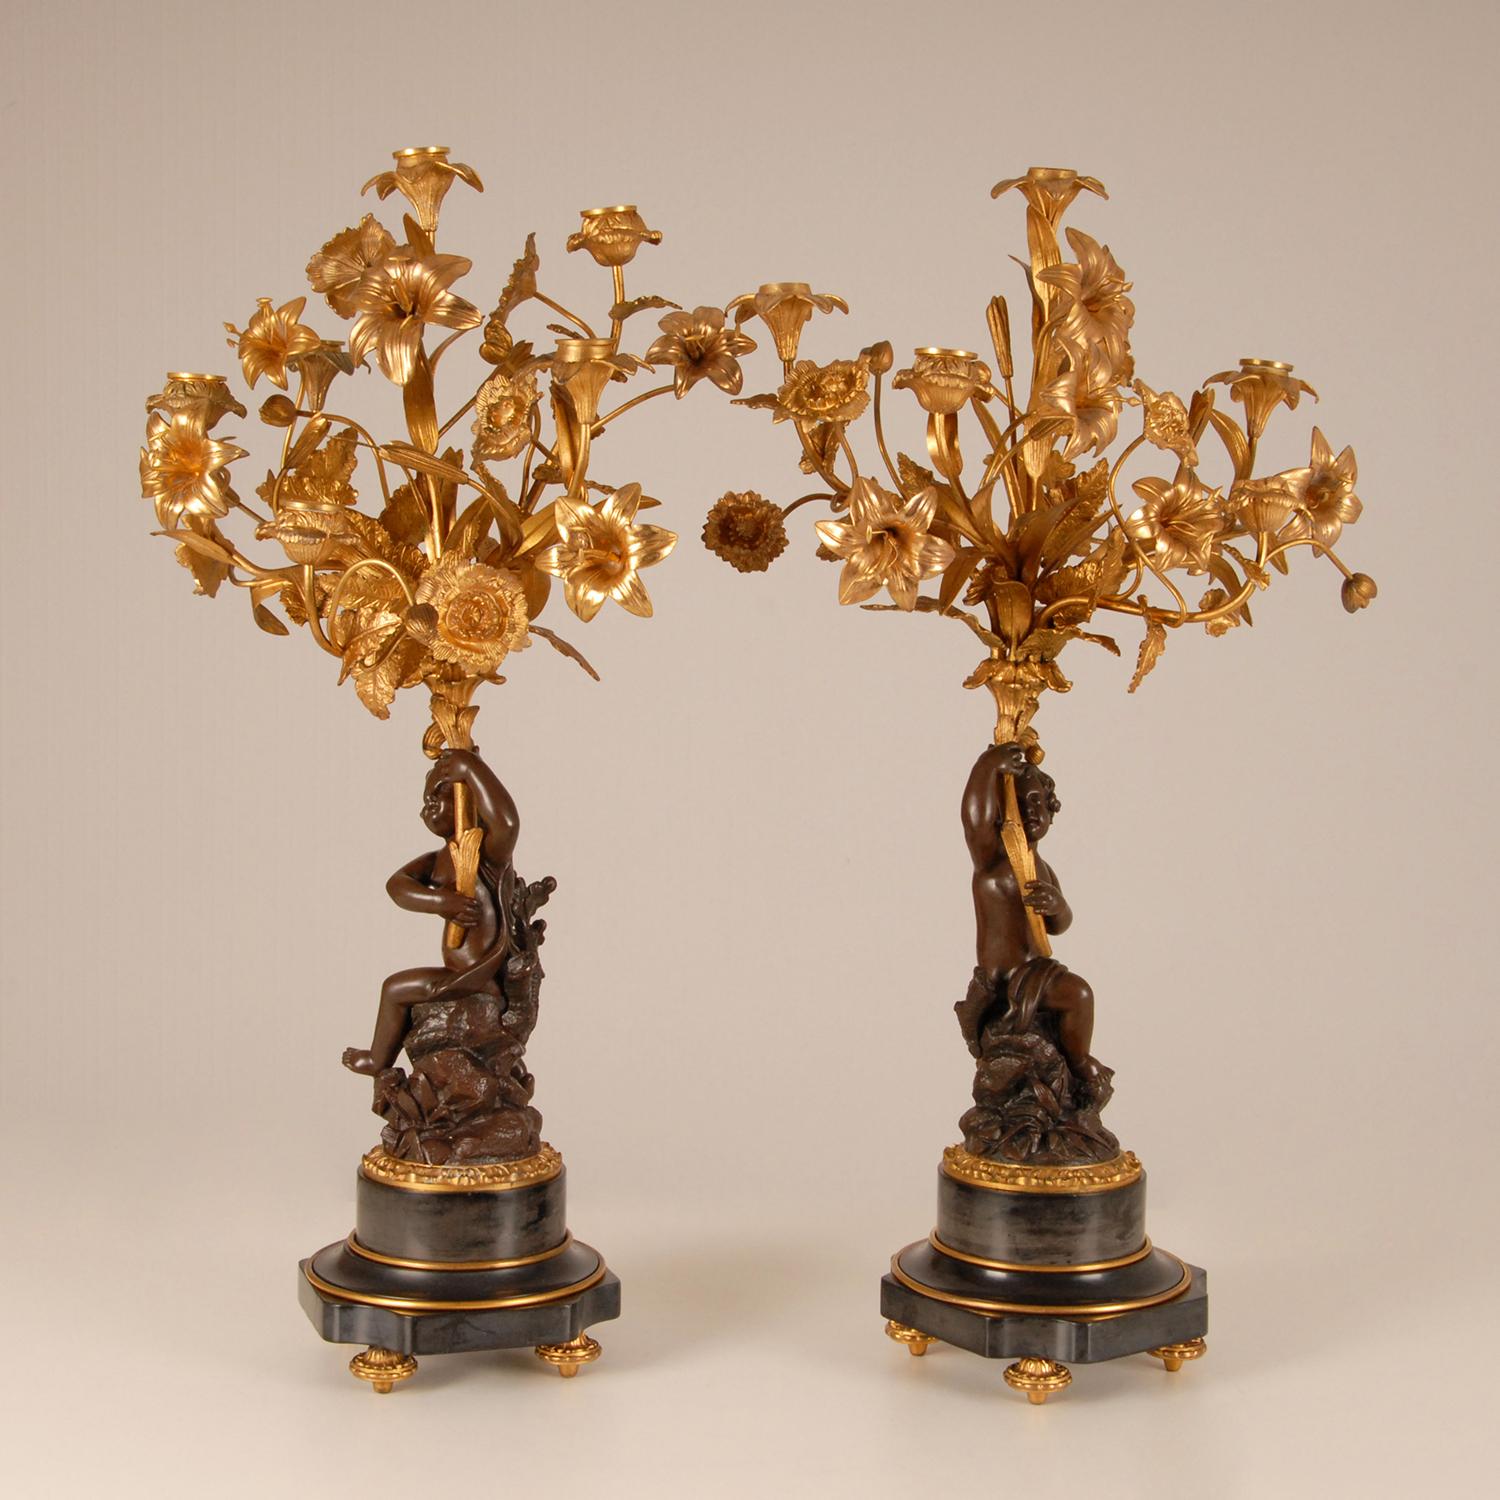 Napoleon III Victorian French Gold Gilded Bronze Putto and Flowers Candelabras on Marble Base